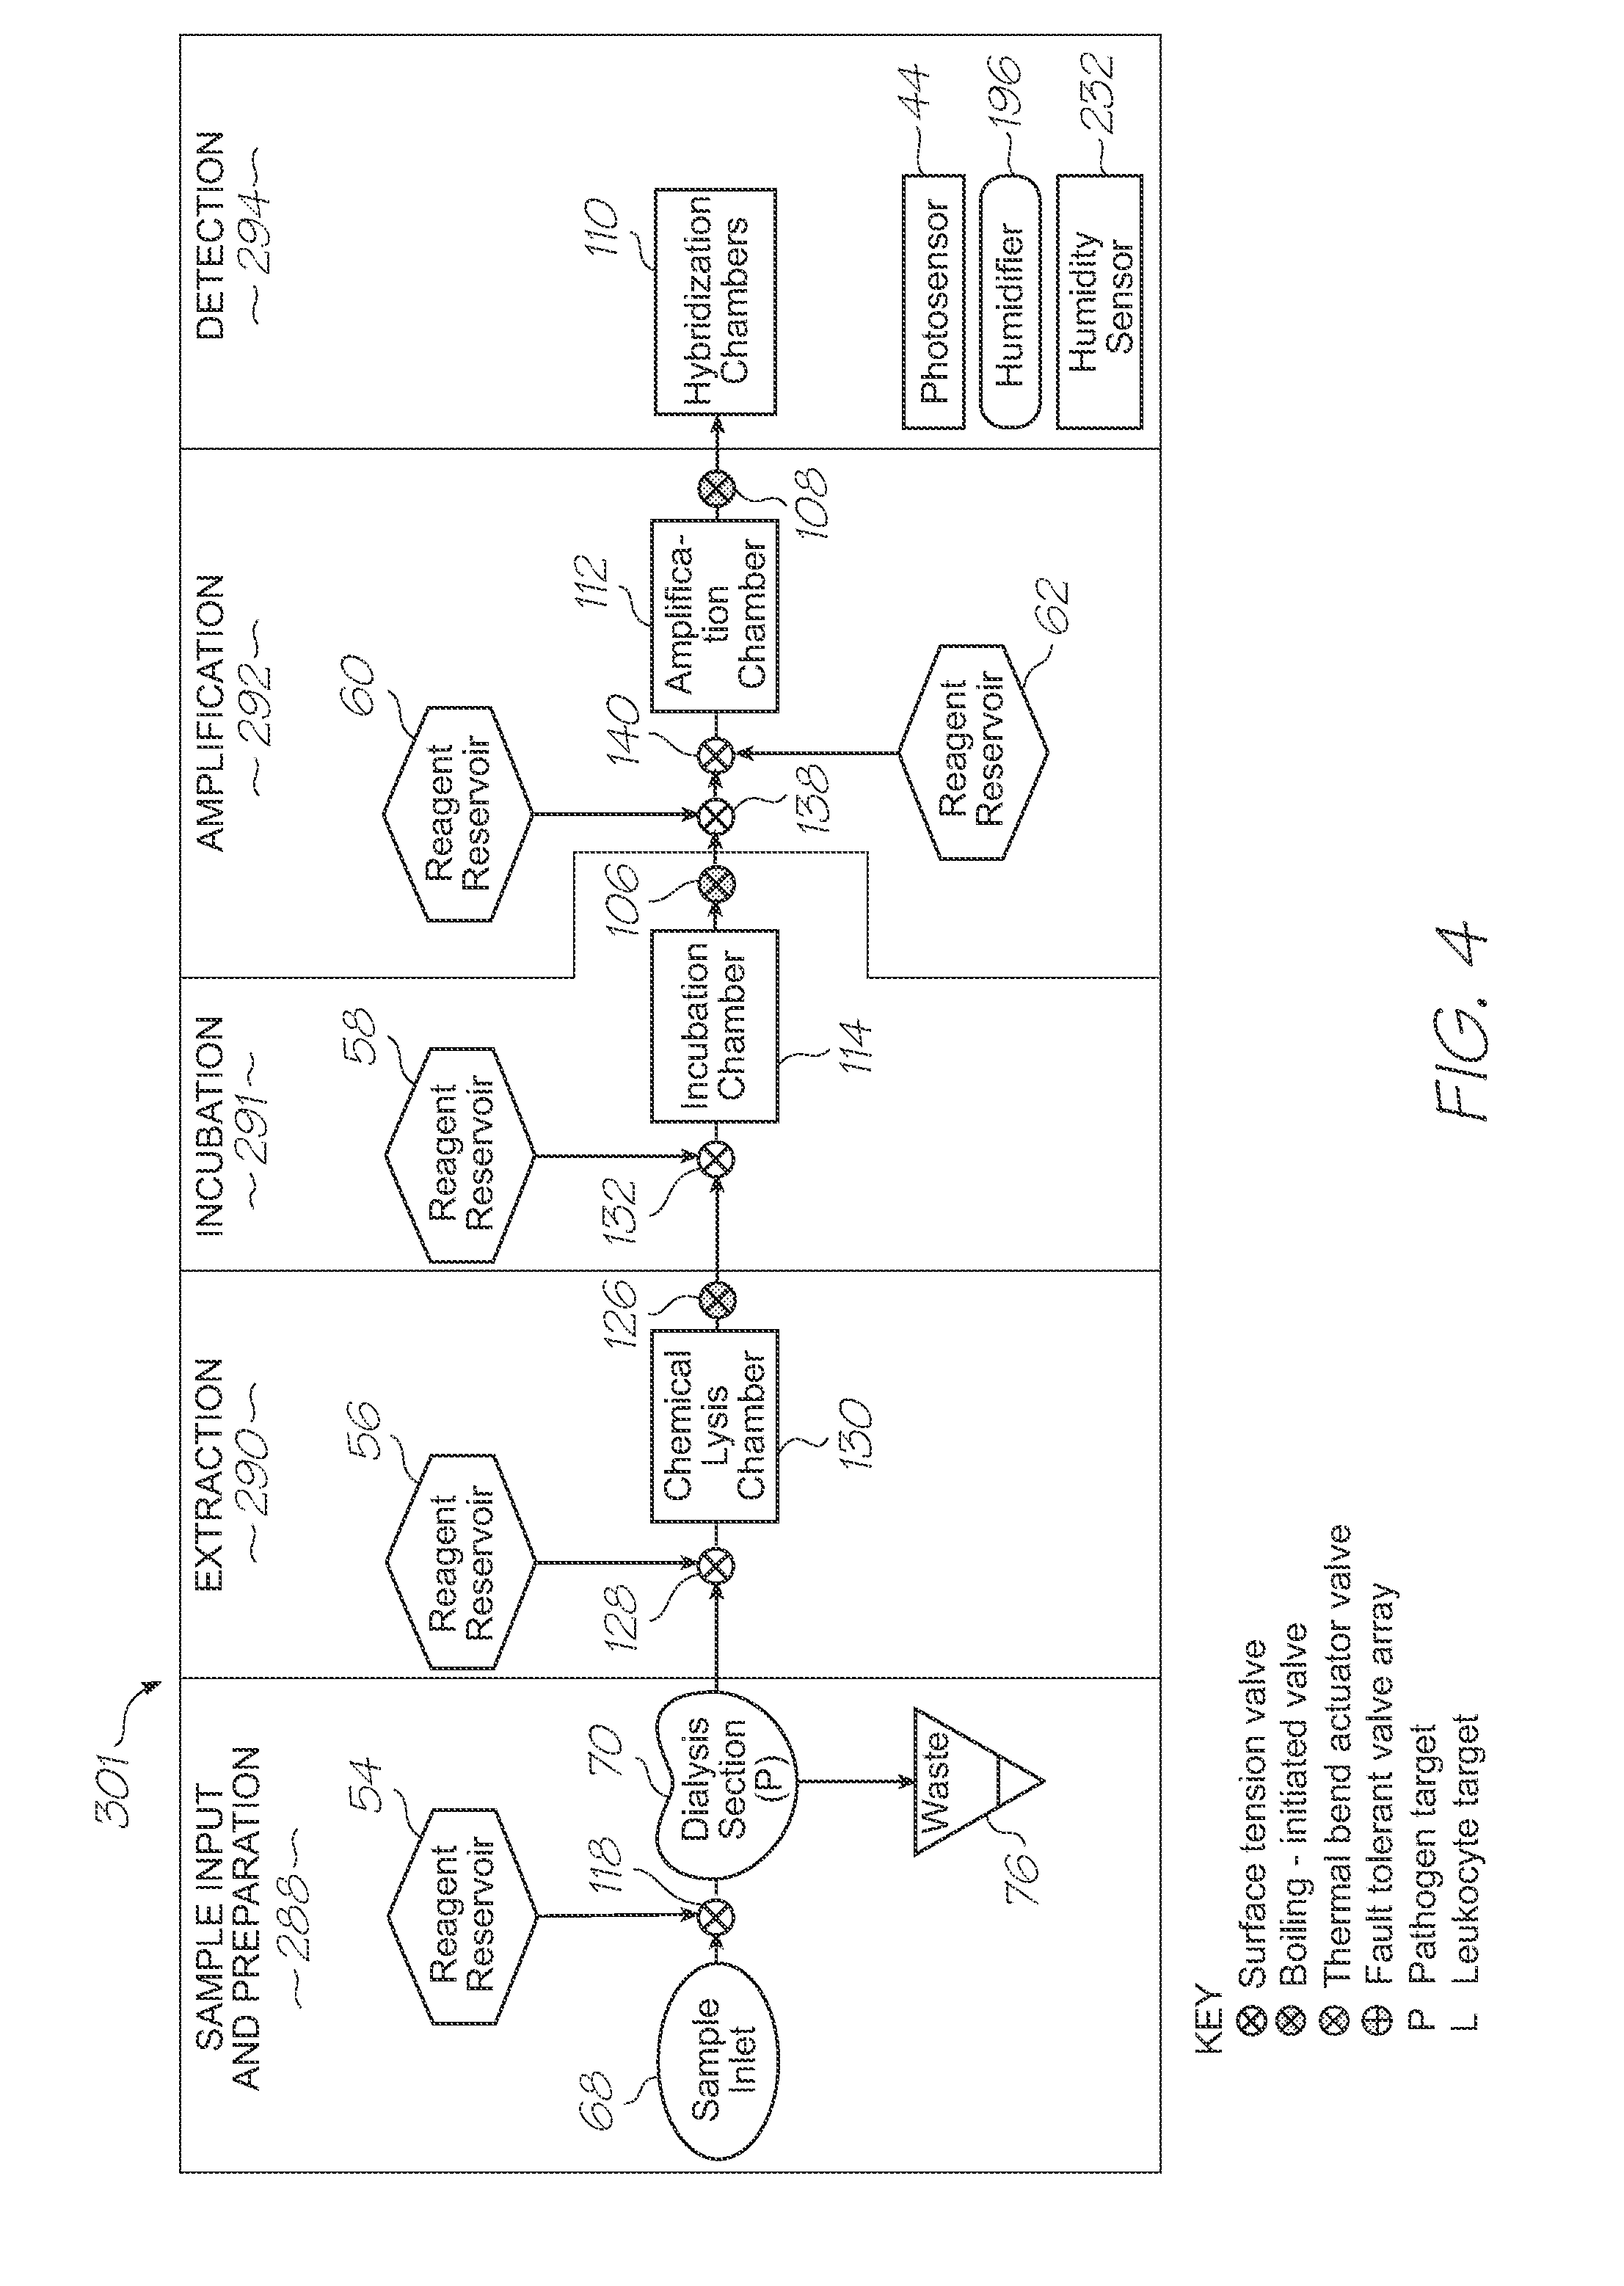 Single-use test module with driver for excitation of electrochemiluminescent luminophores